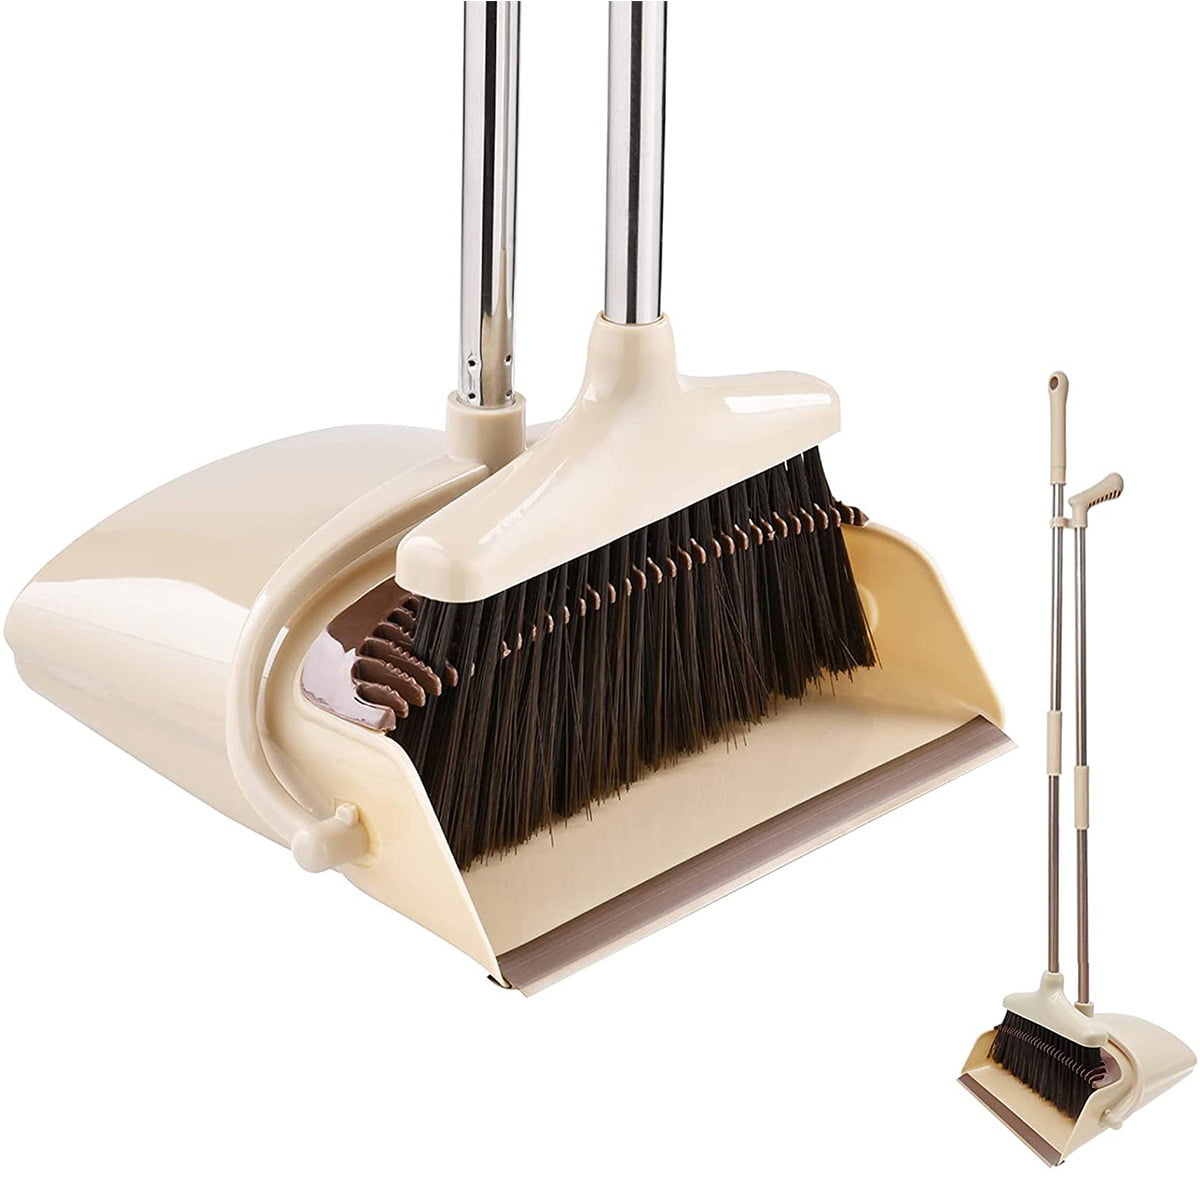 Broom & Dustpan Combo Set for Office Home Kitchen Lobby Floor Use Upright Stand 